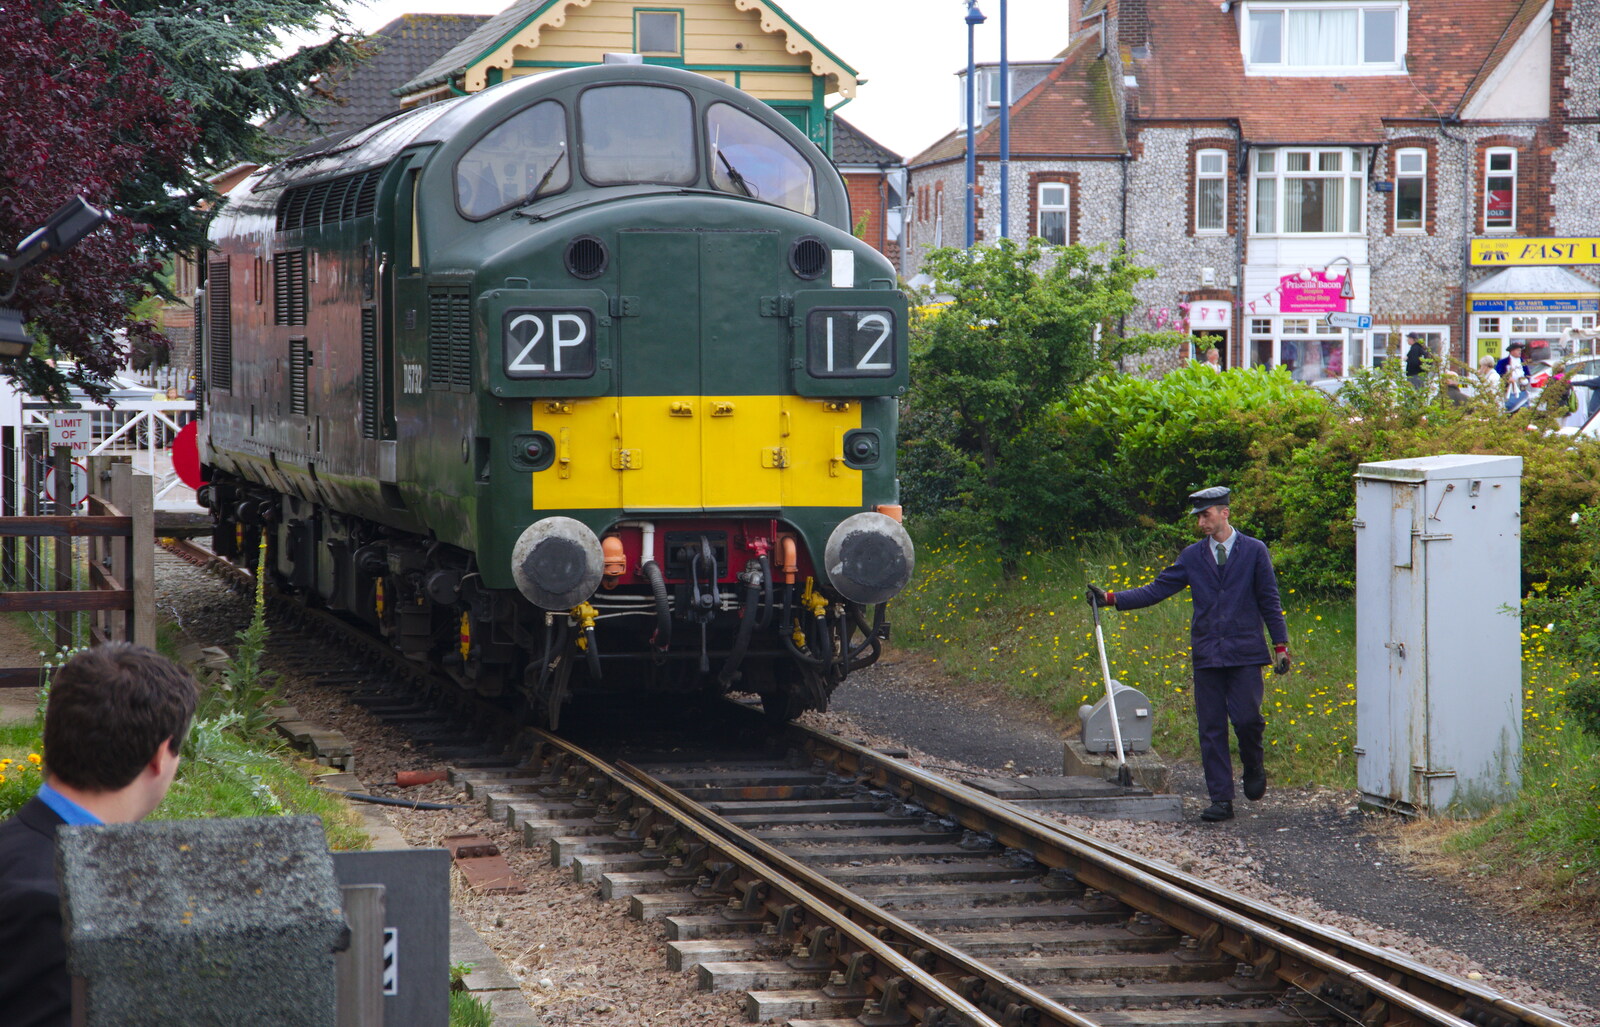 D6732 with 2P12 head code at Sheringham from Kelling Camping and the Potty Morris Festival, Sheringham, North Norfolk - 6th July 2019